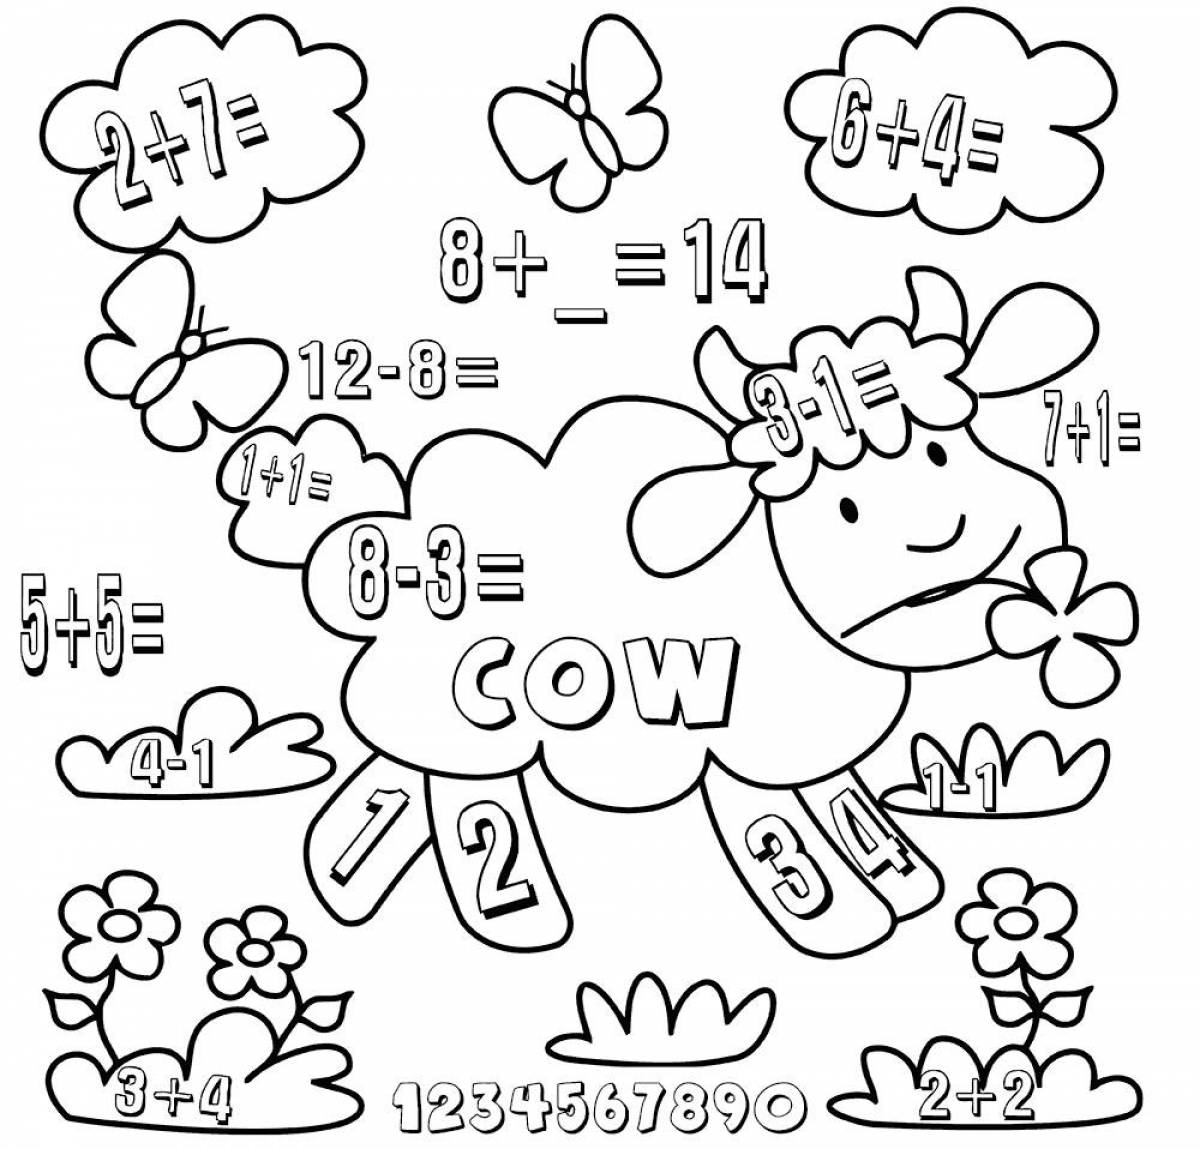 Color-vibrant hey color coloring page